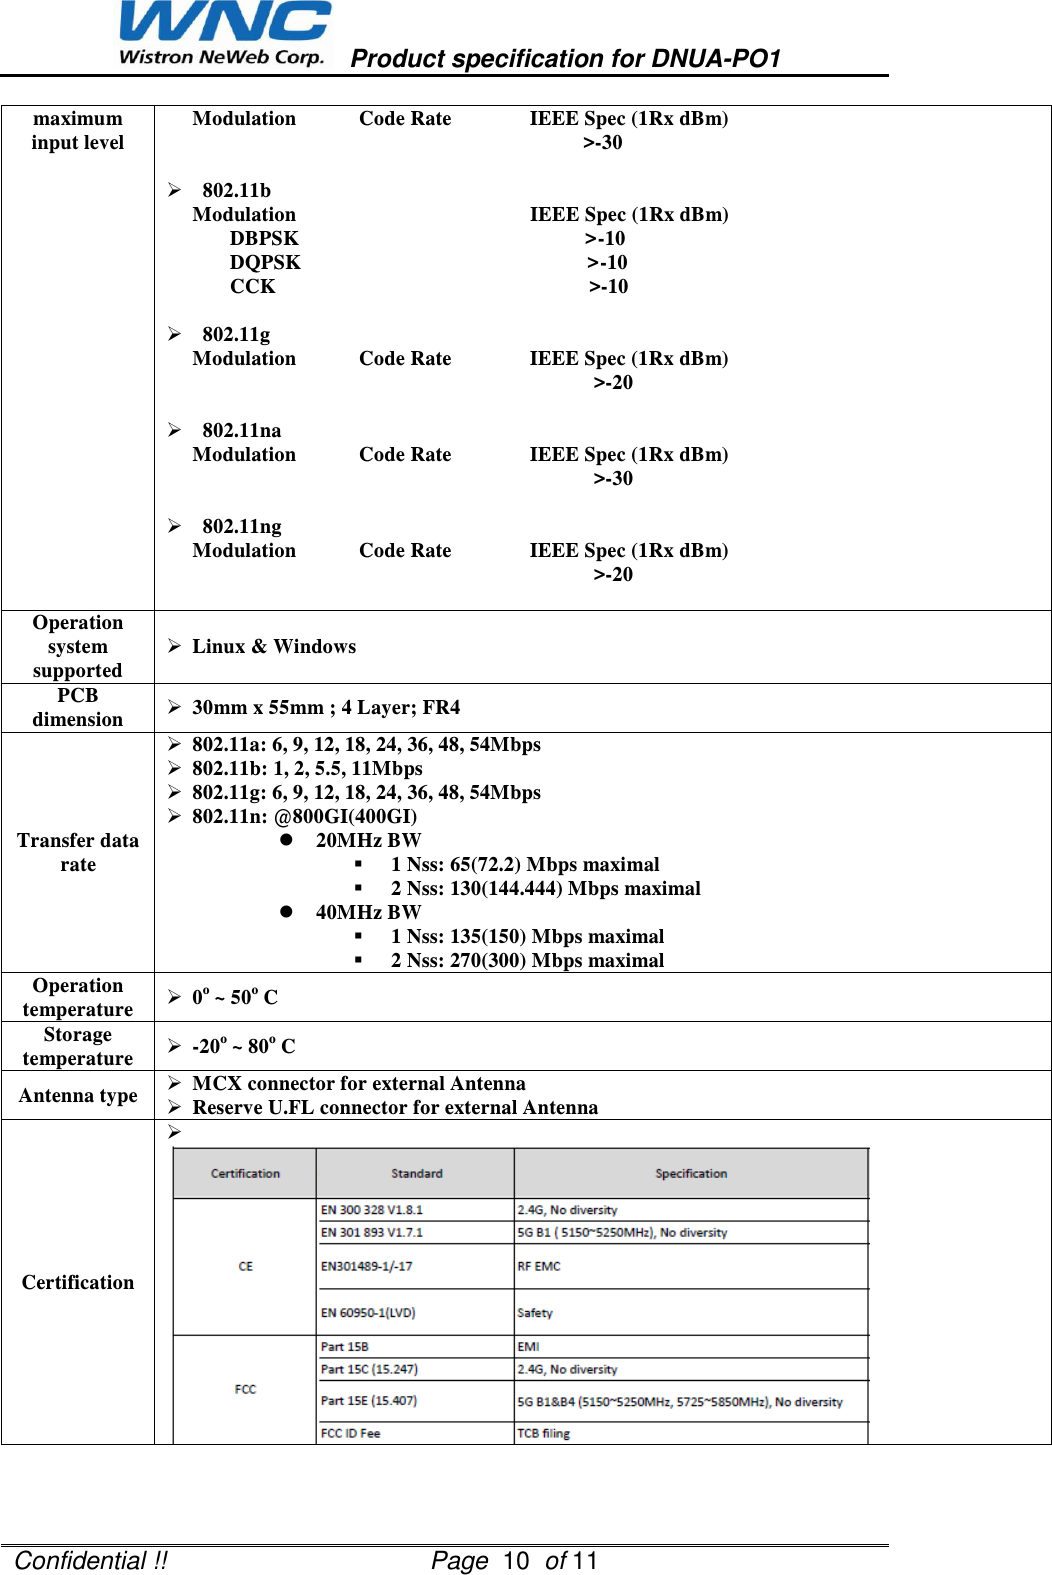   Product specification for DNUA-PO1  Confidential !!                                      Page  10  of 11   maximum input level Modulation            Code Rate               IEEE Spec (1Rx dBm) &gt;-30   802.11b Modulation                                             IEEE Spec (1Rx dBm) DBPSK                                                       &gt;-10 DQPSK                                                       &gt;-10 CCK                                                            &gt;-10   802.11g Modulation            Code Rate               IEEE Spec (1Rx dBm) &gt;-20   802.11na Modulation            Code Rate               IEEE Spec (1Rx dBm) &gt;-30   802.11ng Modulation            Code Rate               IEEE Spec (1Rx dBm) &gt;-20  Operation system supported  Linux &amp; Windows PCB dimension  30mm x 55mm ; 4 Layer; FR4 Transfer data rate  802.11a: 6, 9, 12, 18, 24, 36, 48, 54Mbps  802.11b: 1, 2, 5.5, 11Mbps  802.11g: 6, 9, 12, 18, 24, 36, 48, 54Mbps  802.11n: @800GI(400GI)  20MHz BW   1 Nss: 65(72.2) Mbps maximal  2 Nss: 130(144.444) Mbps maximal  40MHz BW  1 Nss: 135(150) Mbps maximal  2 Nss: 270(300) Mbps maximal Operation temperature  0o ~ 50o C Storage temperature  -20o ~ 80o C Antenna type  MCX connector for external Antenna   Reserve U.FL connector for external Antenna Certification    